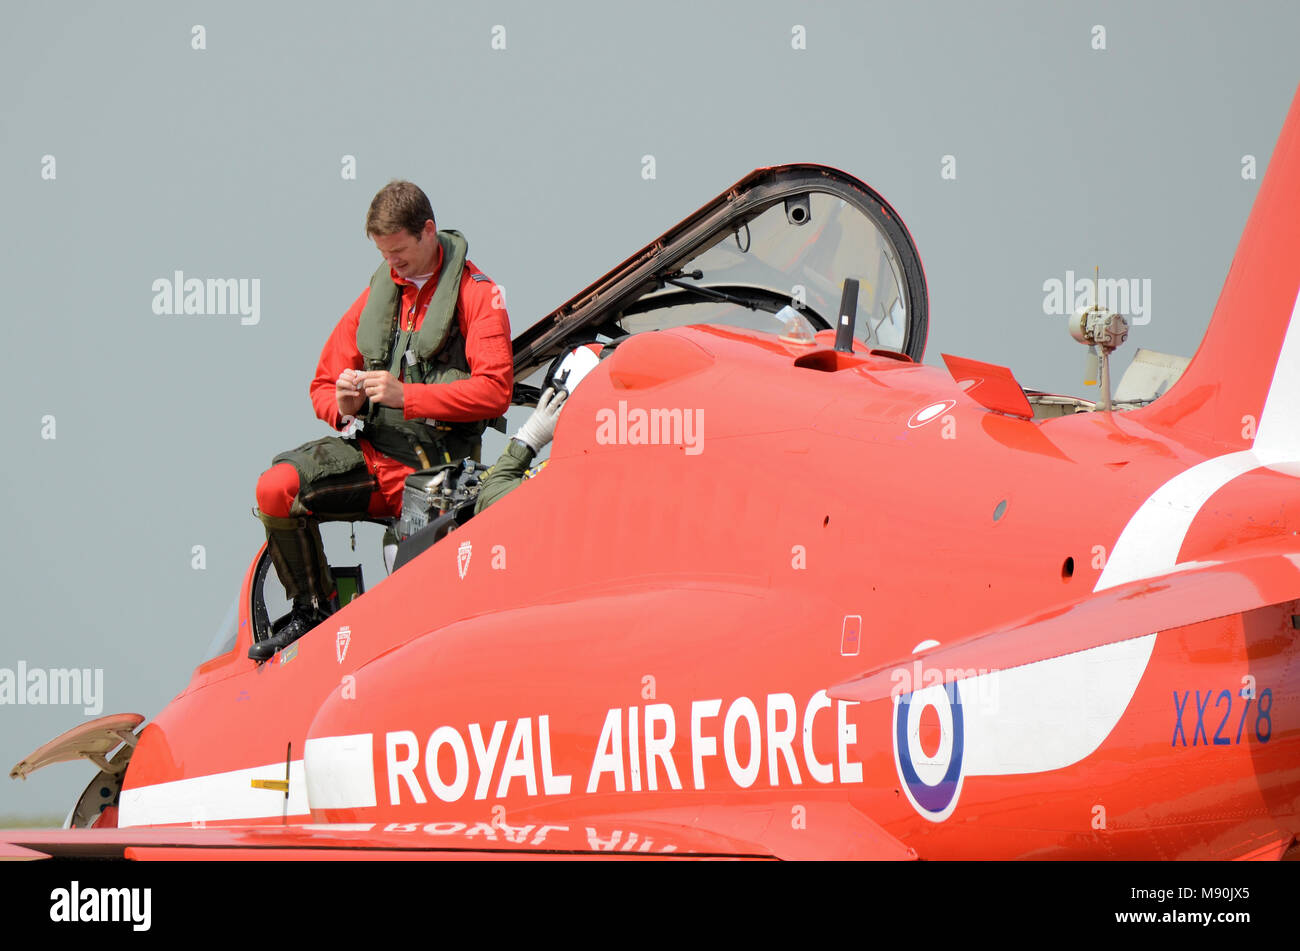 Pilot Jim Turner, then Team Leader Red 1 of Royal Air Force Red Arrows climbing out of the cockpit of a BAe Hawk T1 jet plane at RAF Scampton Stock Photo